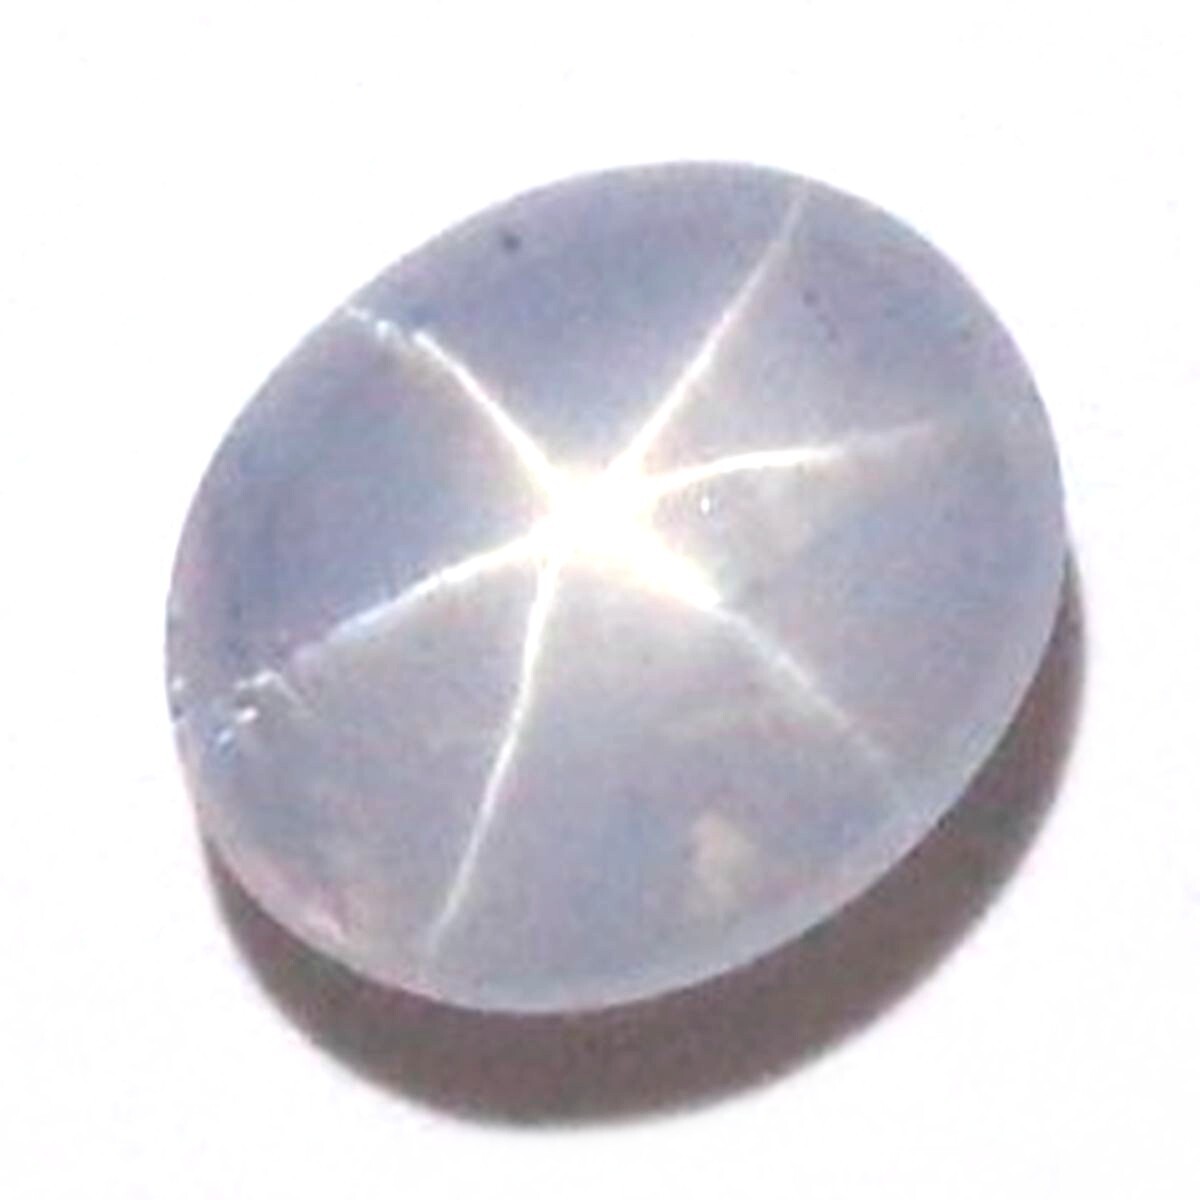 apf550* Star sapphire loose 3.31ct approximately 8.0×6.6mm ring / pendant / brooch etc. accessory work .!#NK771